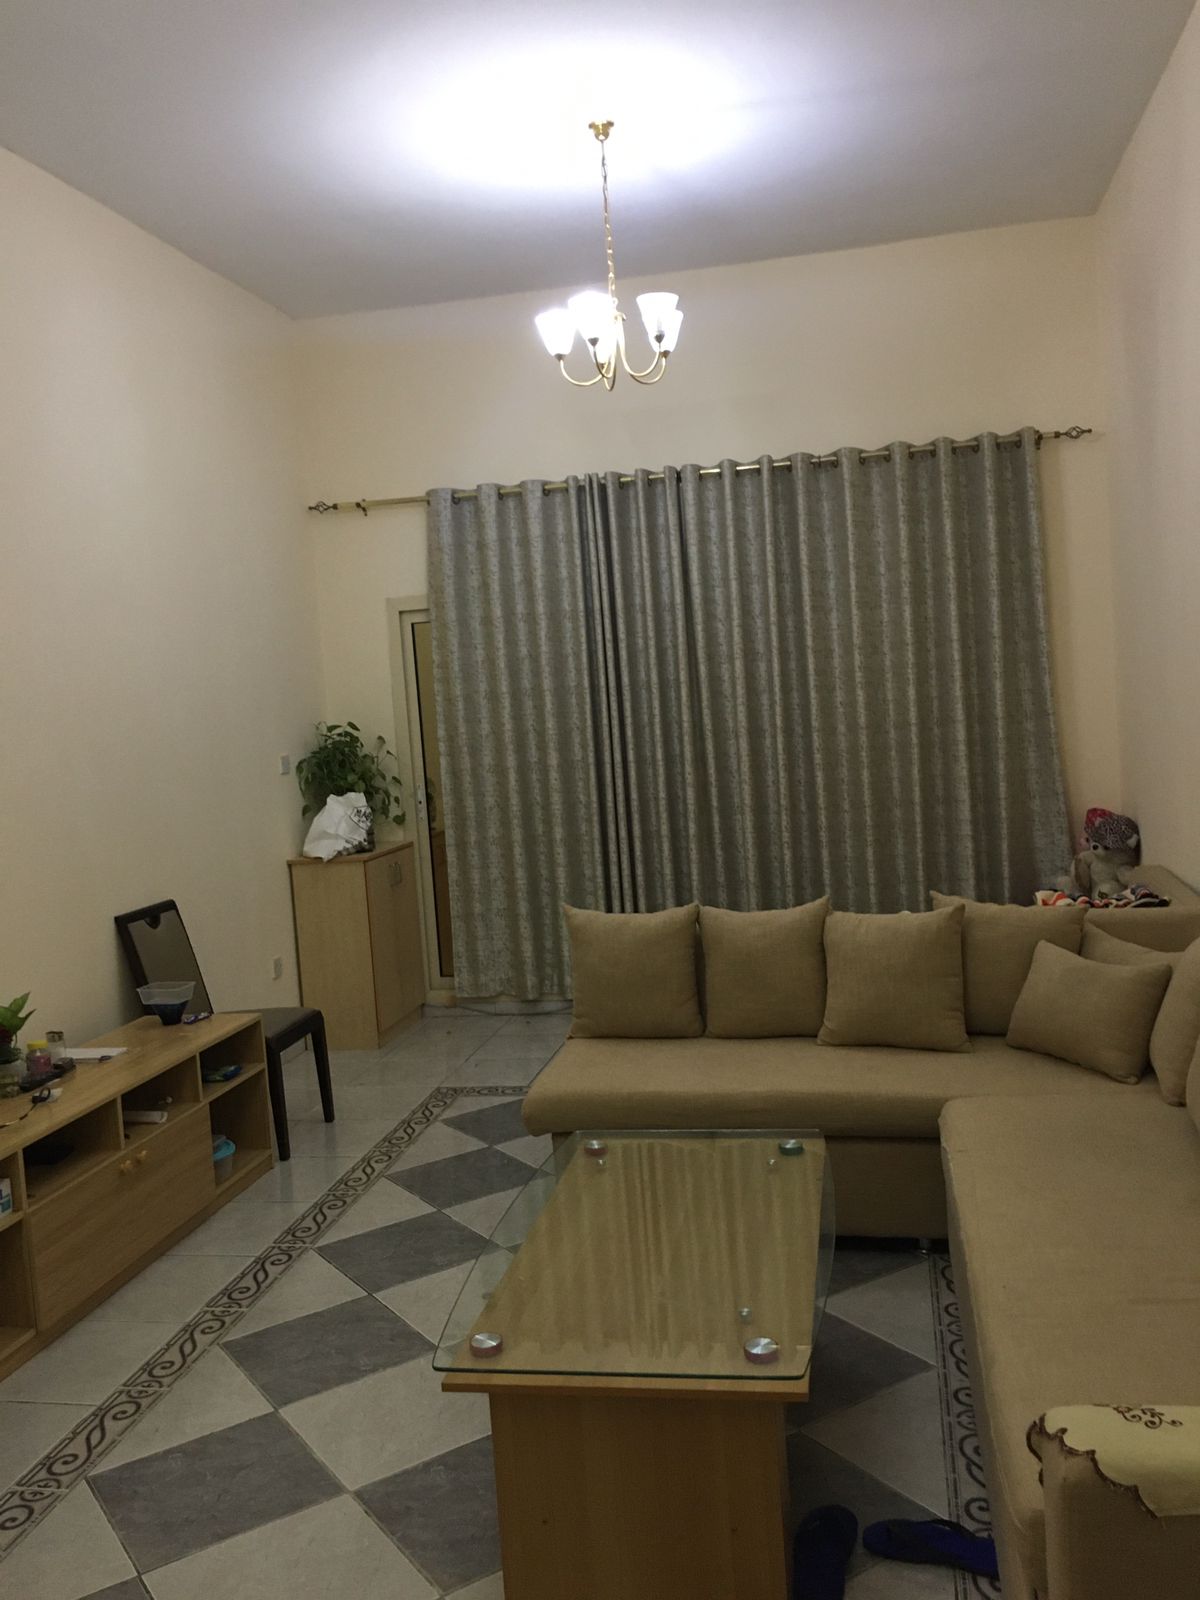 Monthly 1 for rent in Abu Hail,   Dubai 